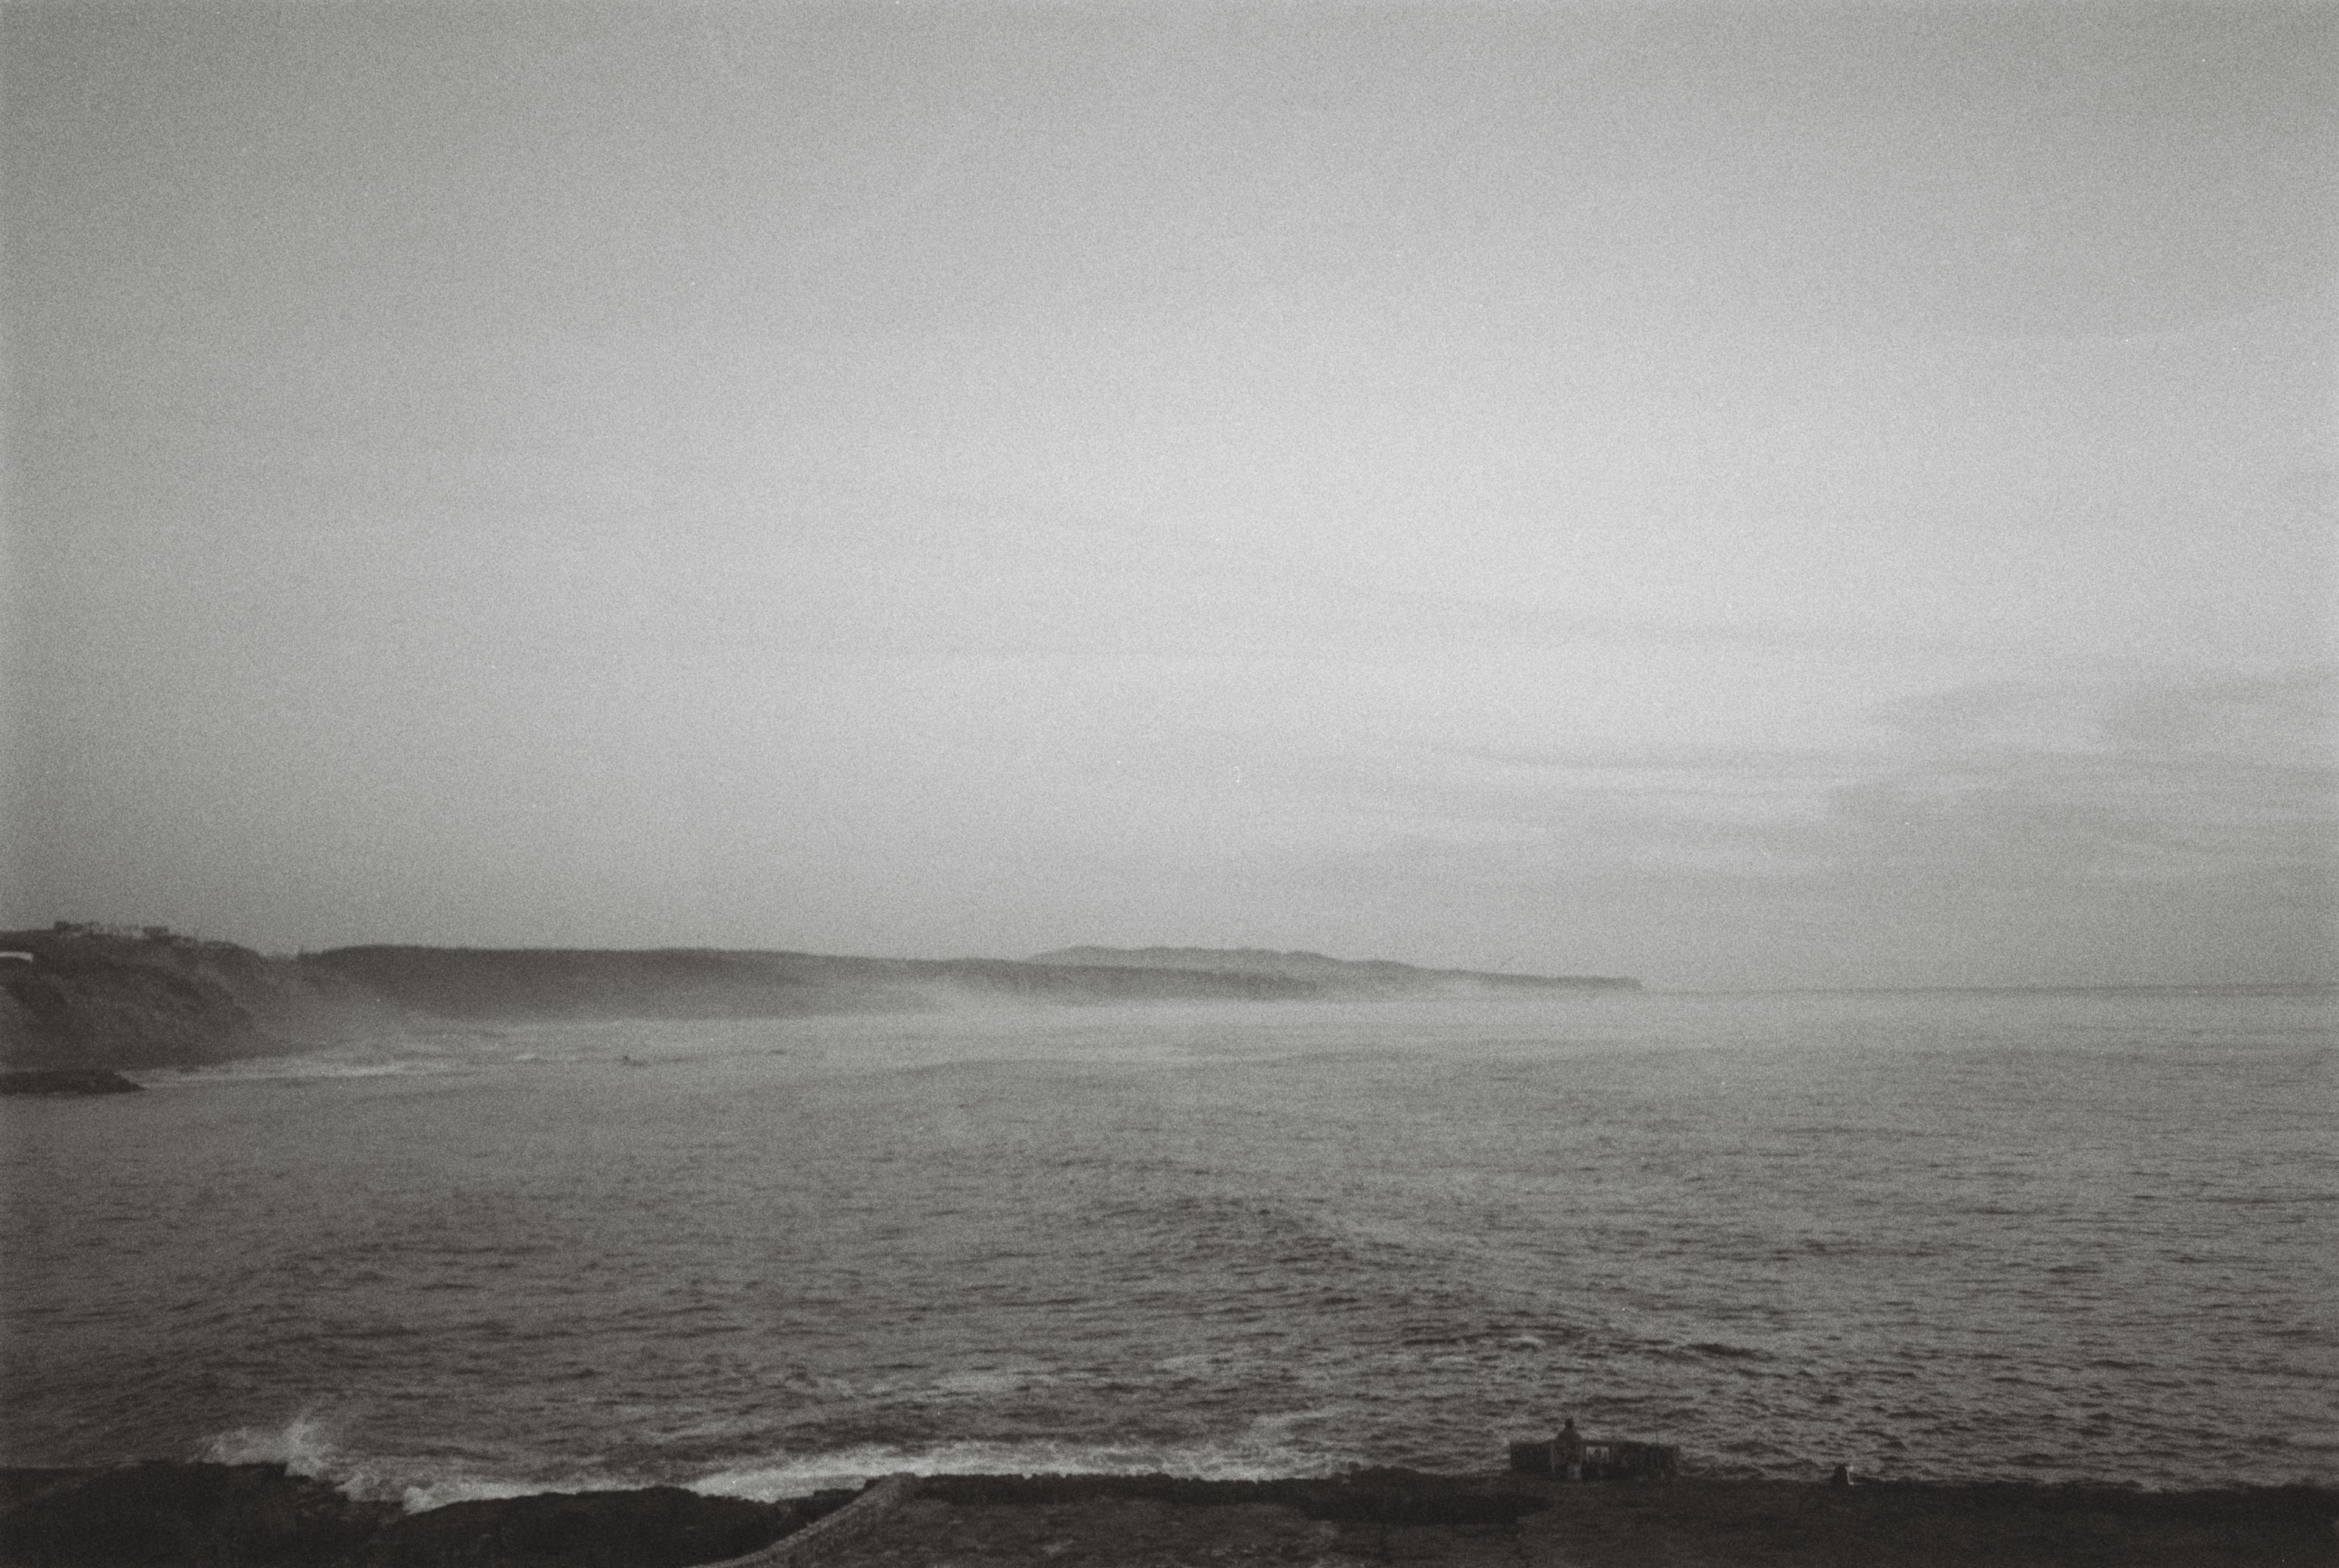 Black and white landscape picture of the sea by the coast of Portugal with calm water